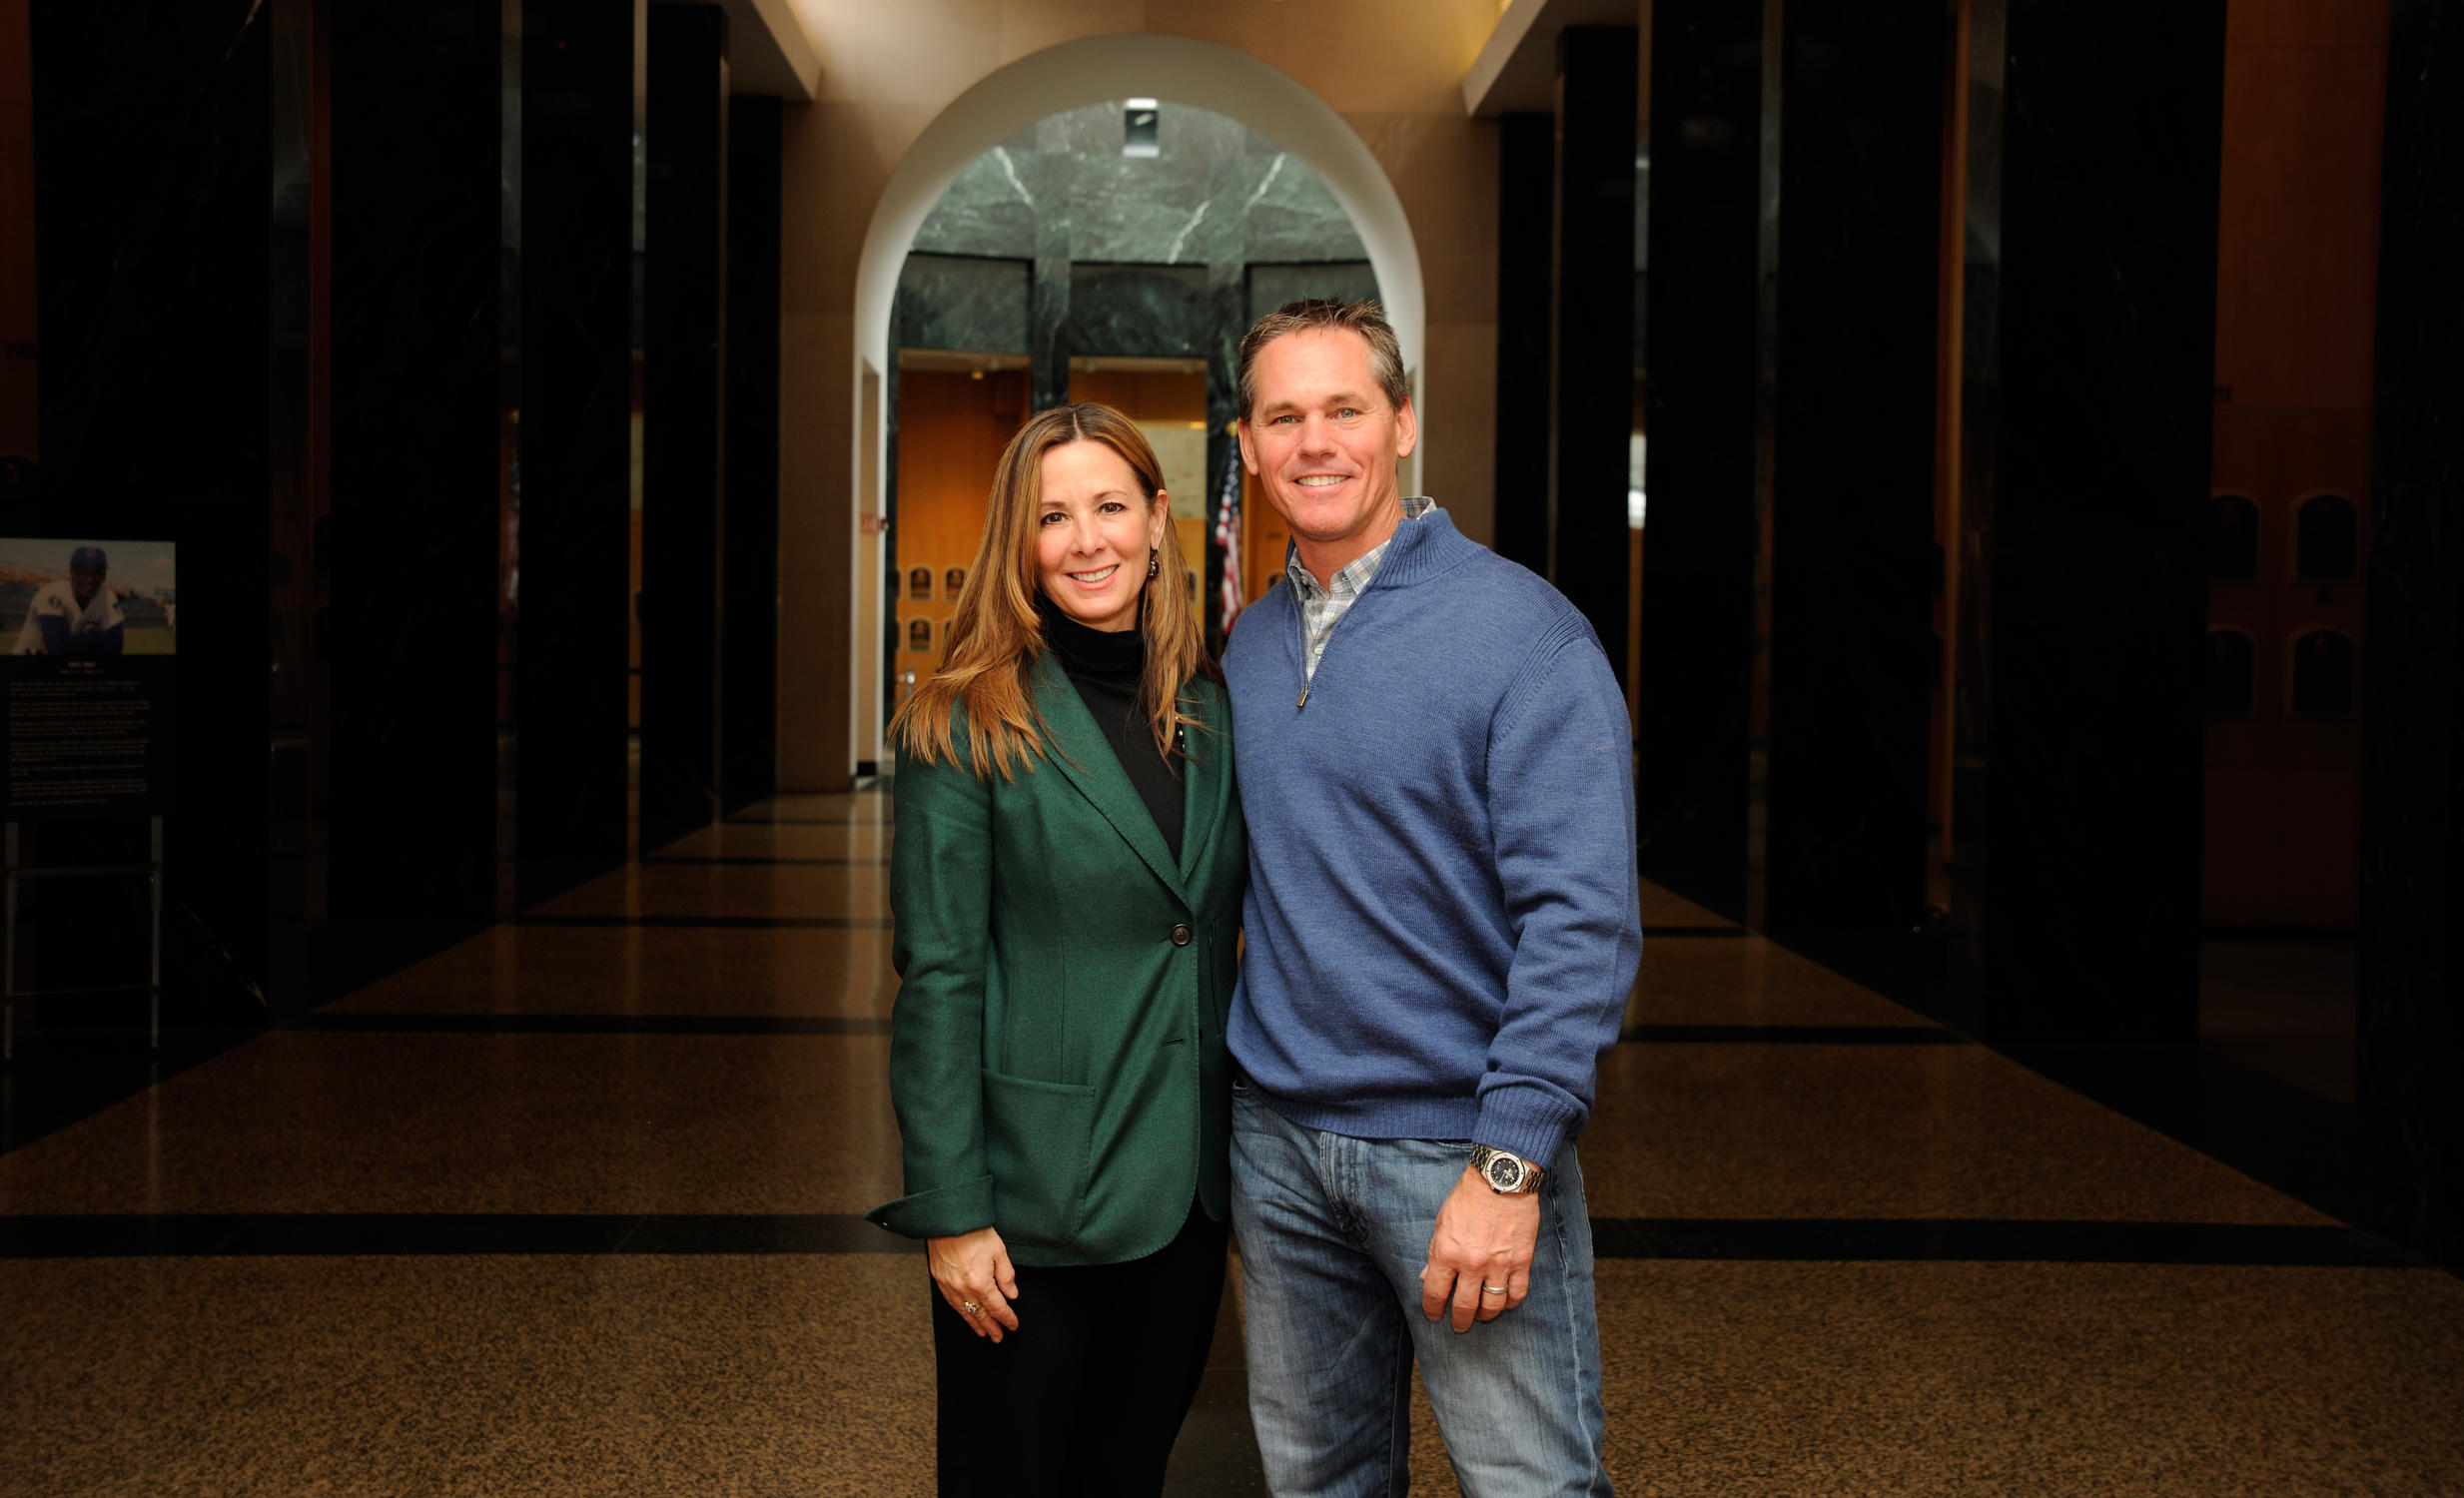 As a wife and mother of a major leaguer, Patty Biggio has seen it